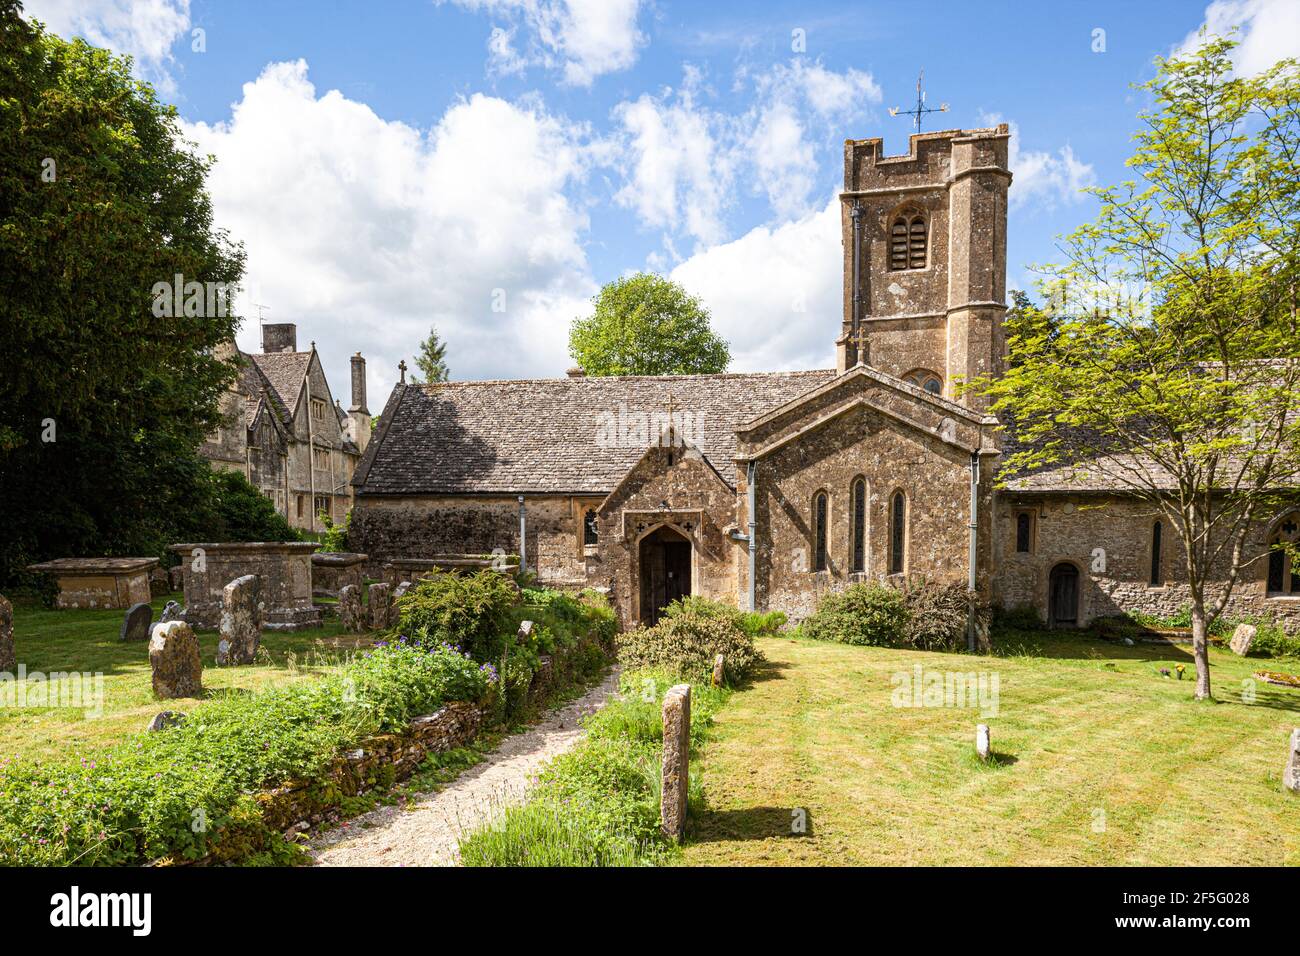 St Andrews church next to the manor house in the Cotswold village of Sevenhampton, Gloucestershire UK Stock Photo